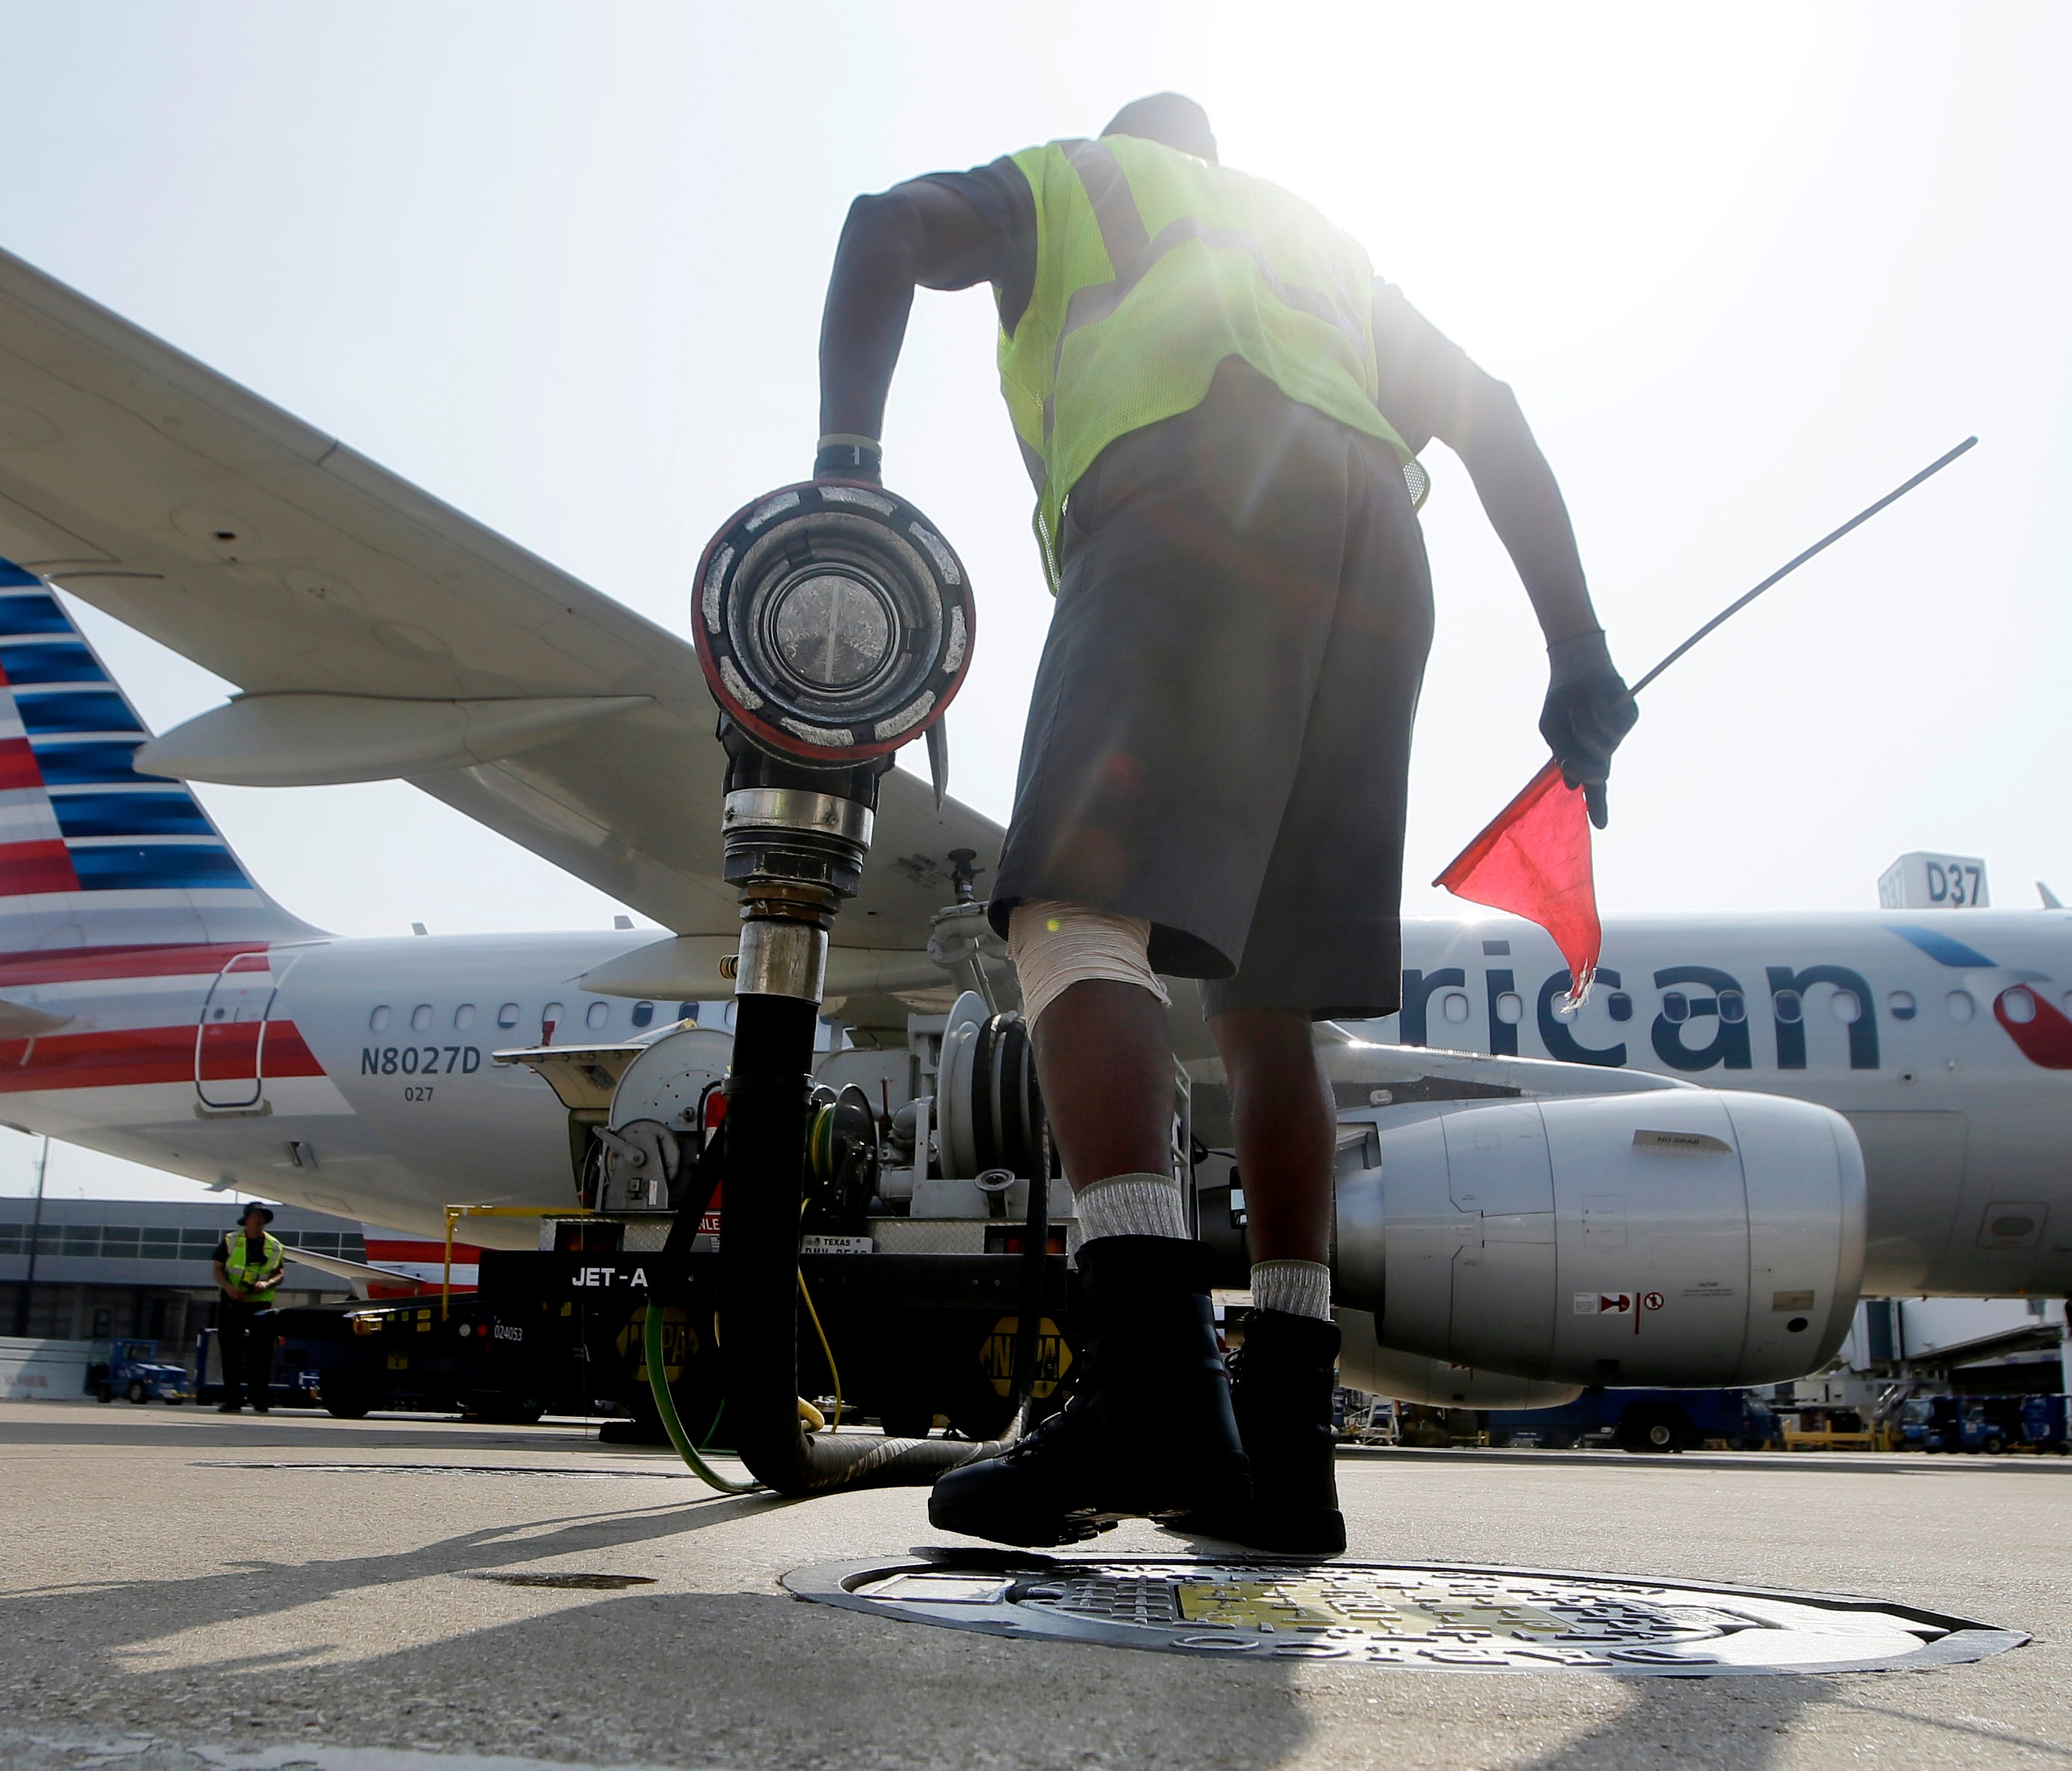 Scott Mills finishes fueling up an American Airlines jet at Dallas/Fort Worth International Airport on Aug. 26, 2015.